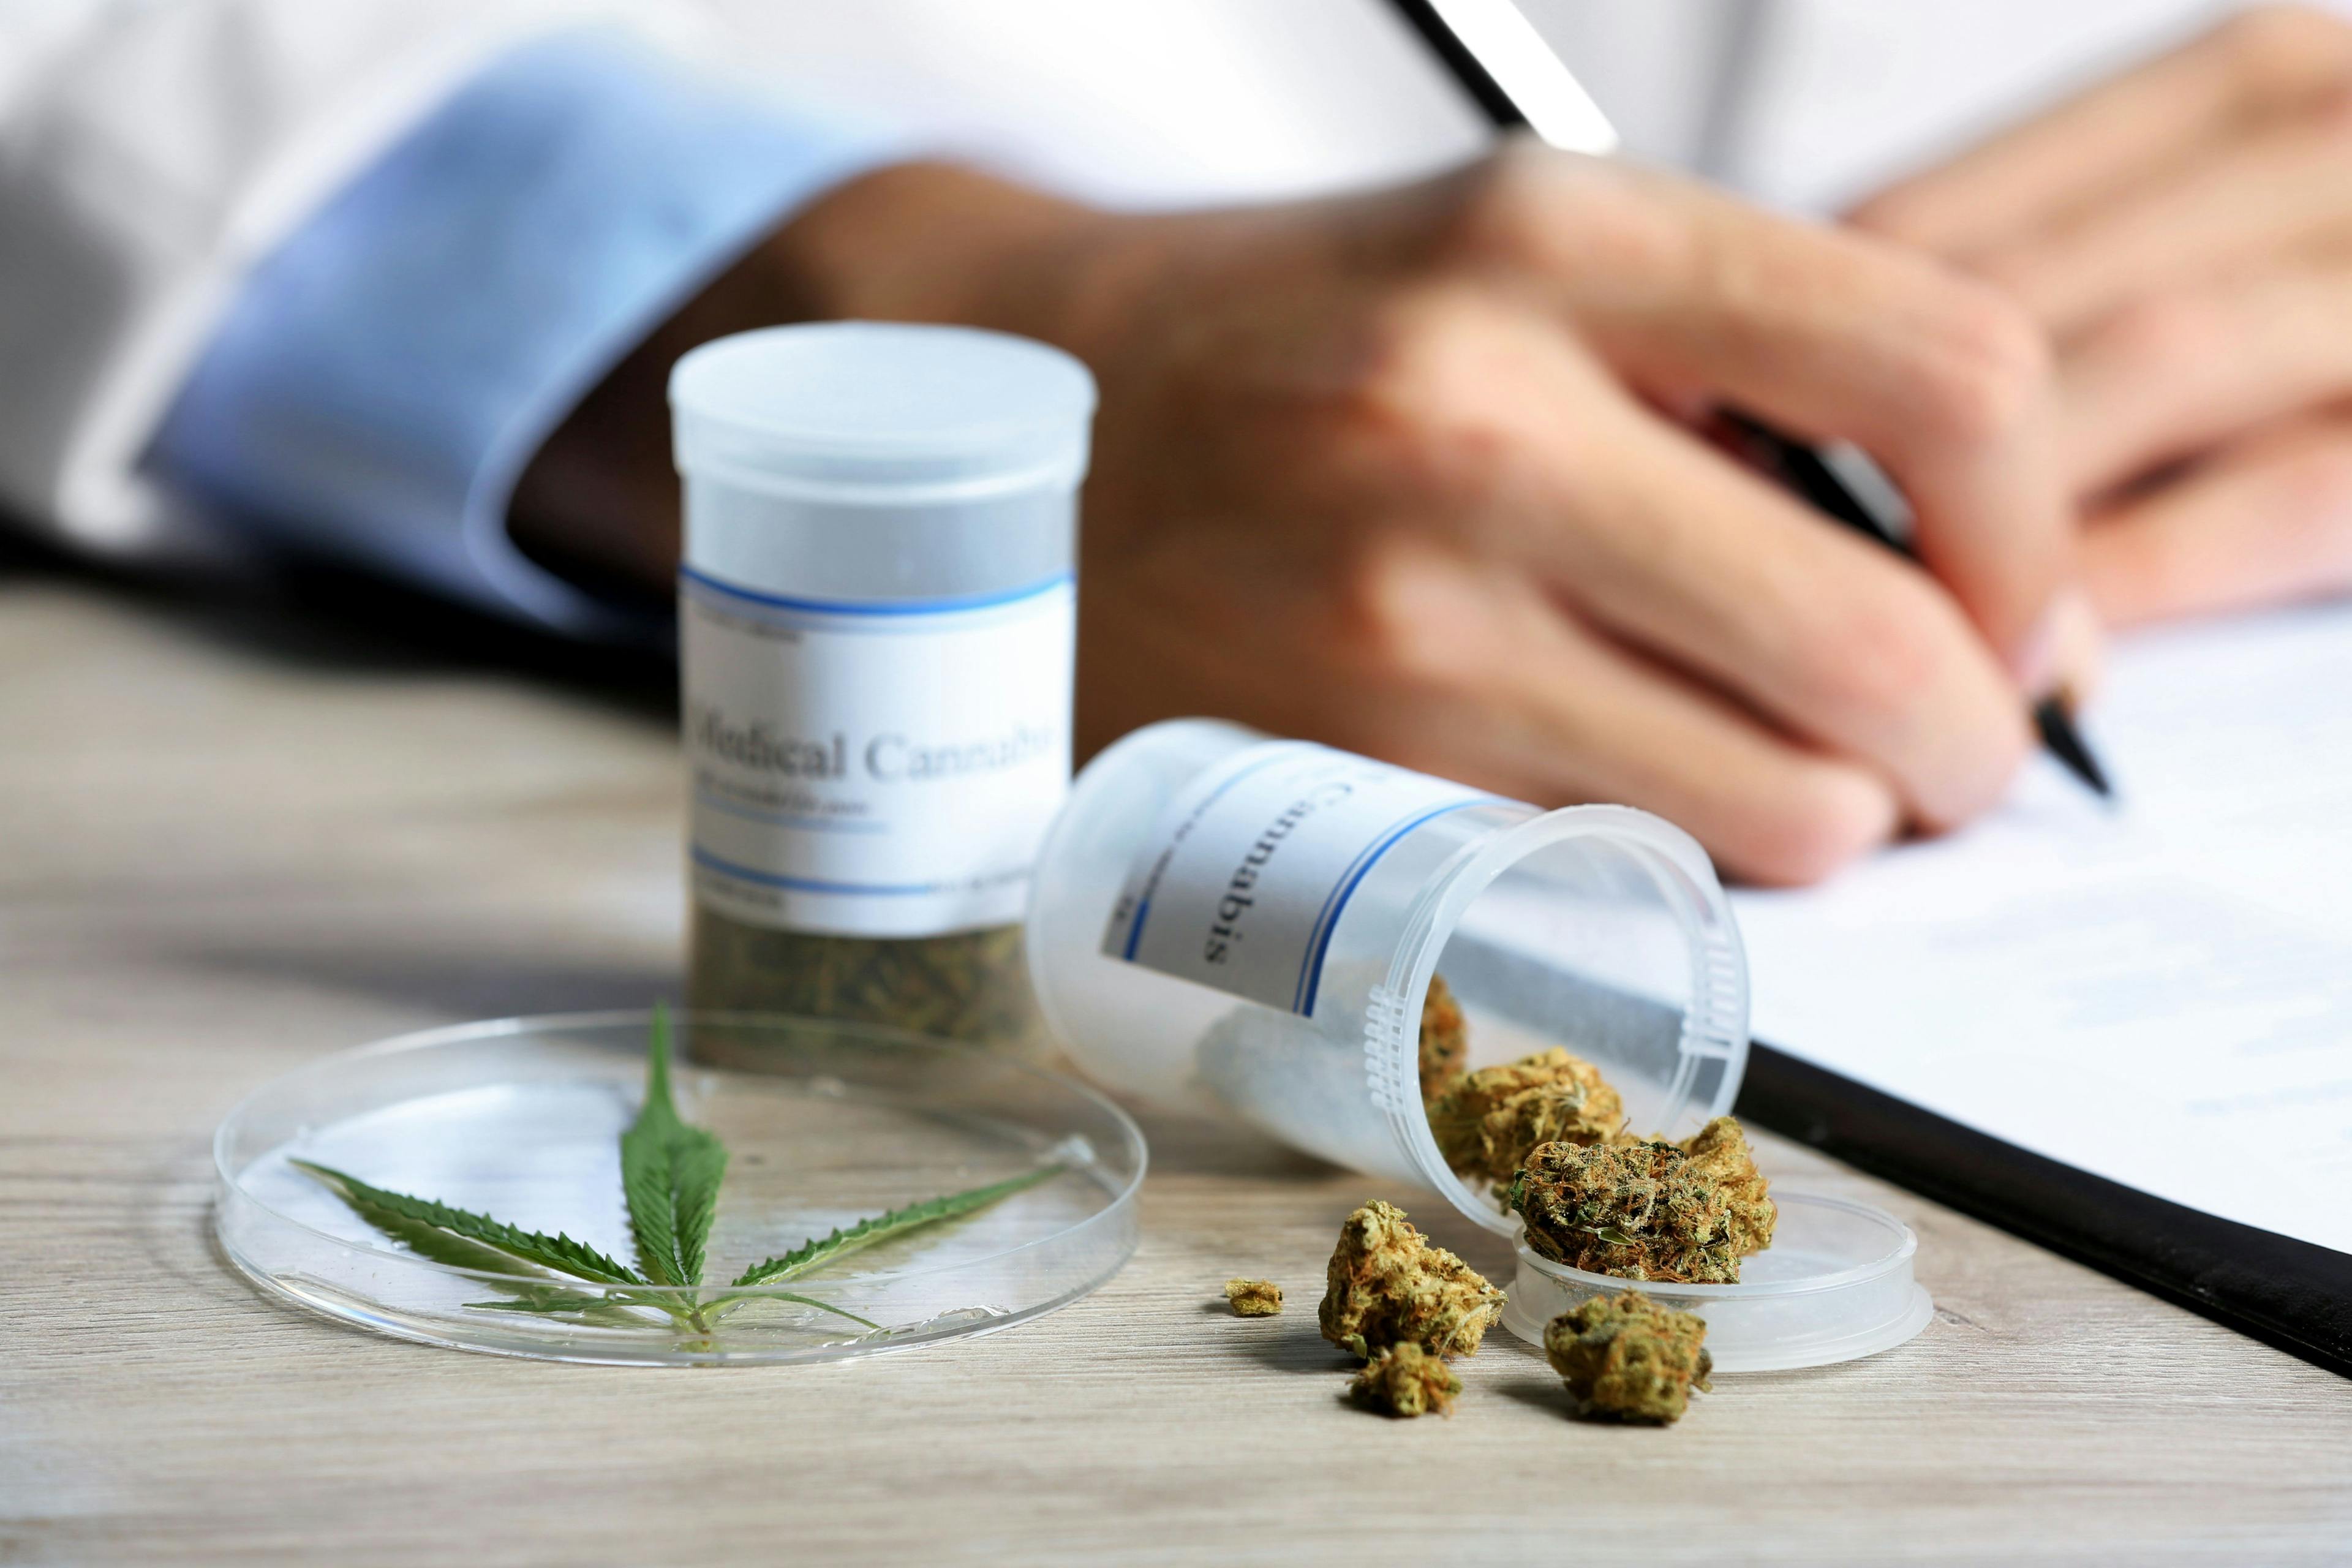 As Cannabis Use Increases, Pharmacists Must Be Prepared to Counsel Patients